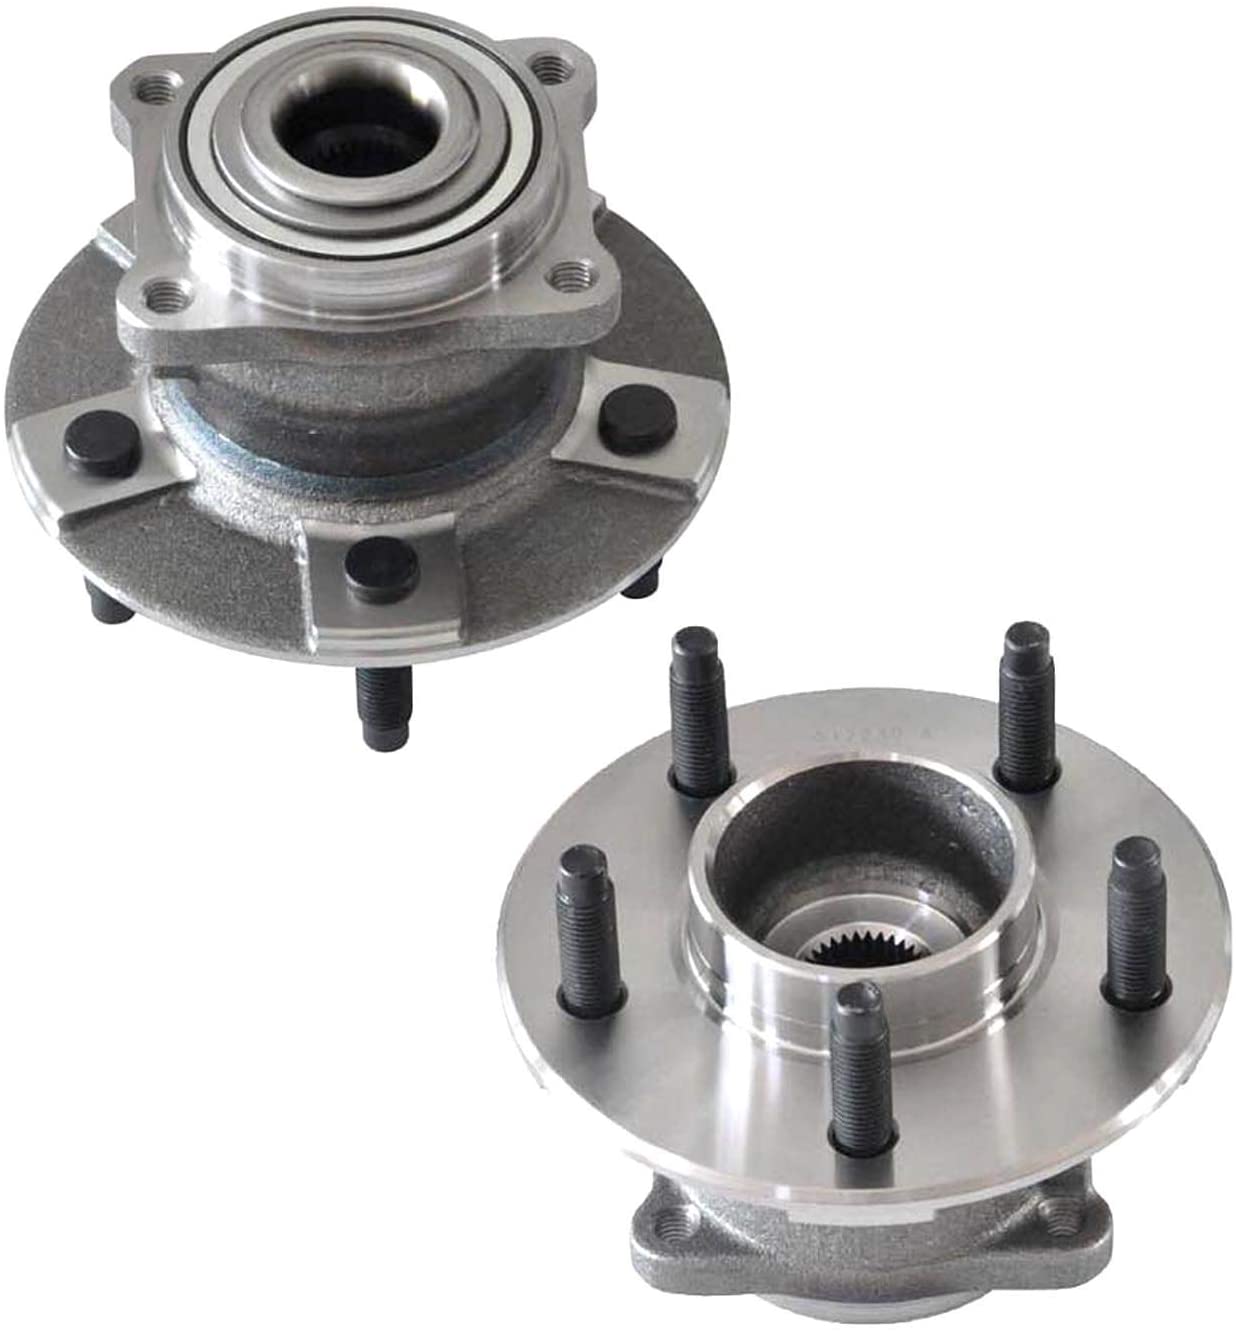 A-Premium Wheel Hub and Bearing Assembly Compatible with Chevrolet Equinox 2005-2006 Pontiac 2006 Saturn Vue 2002-2007 Rear Left and Right 2-PC Set 